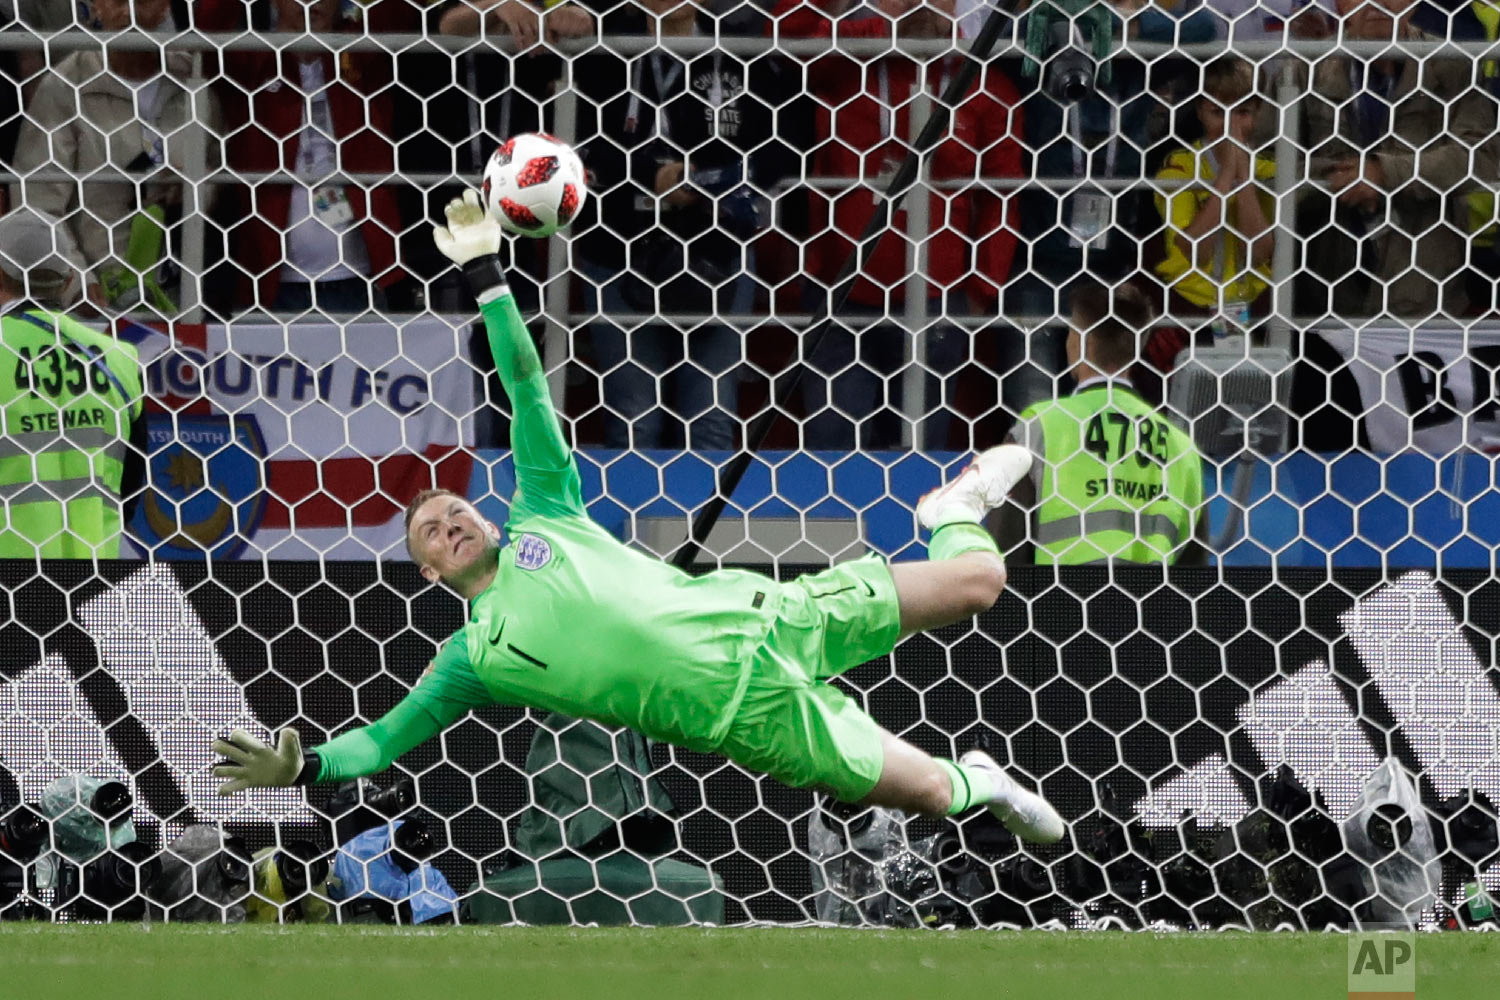  England goalkeeper Jordan Pickford saves a penalty during the round of 16 match between Colombia and England at the 2018 soccer World Cup in the Spartak Stadium, in Moscow, Russia on July 3, 2018. (AP Photo/Matthias Schrader) 